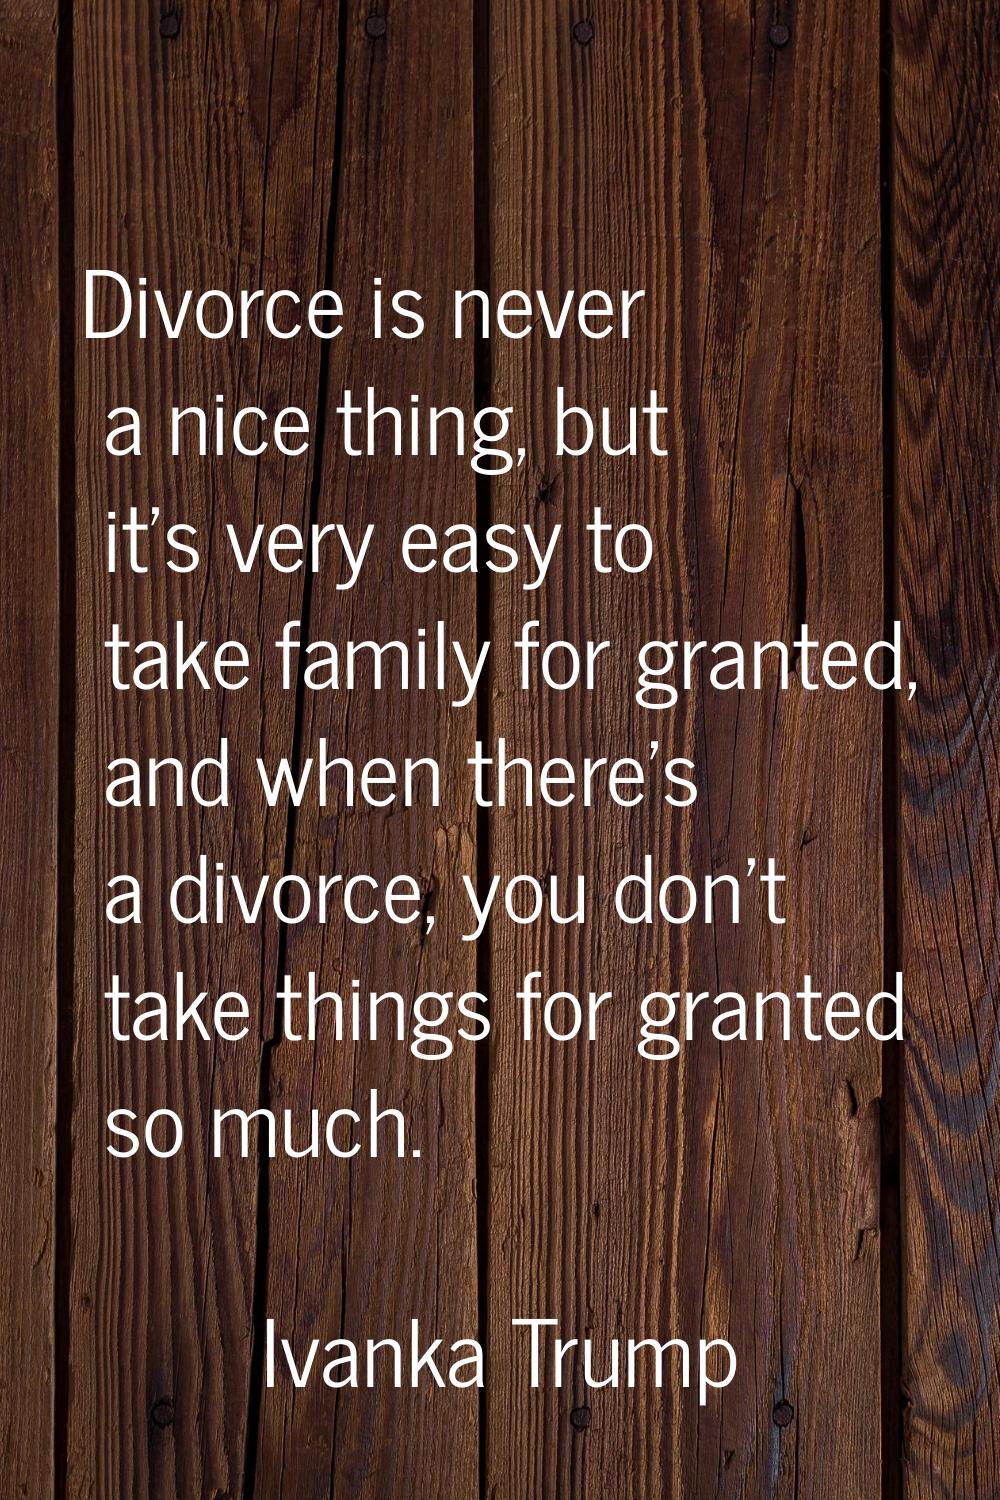 Divorce is never a nice thing, but it's very easy to take family for granted, and when there's a di